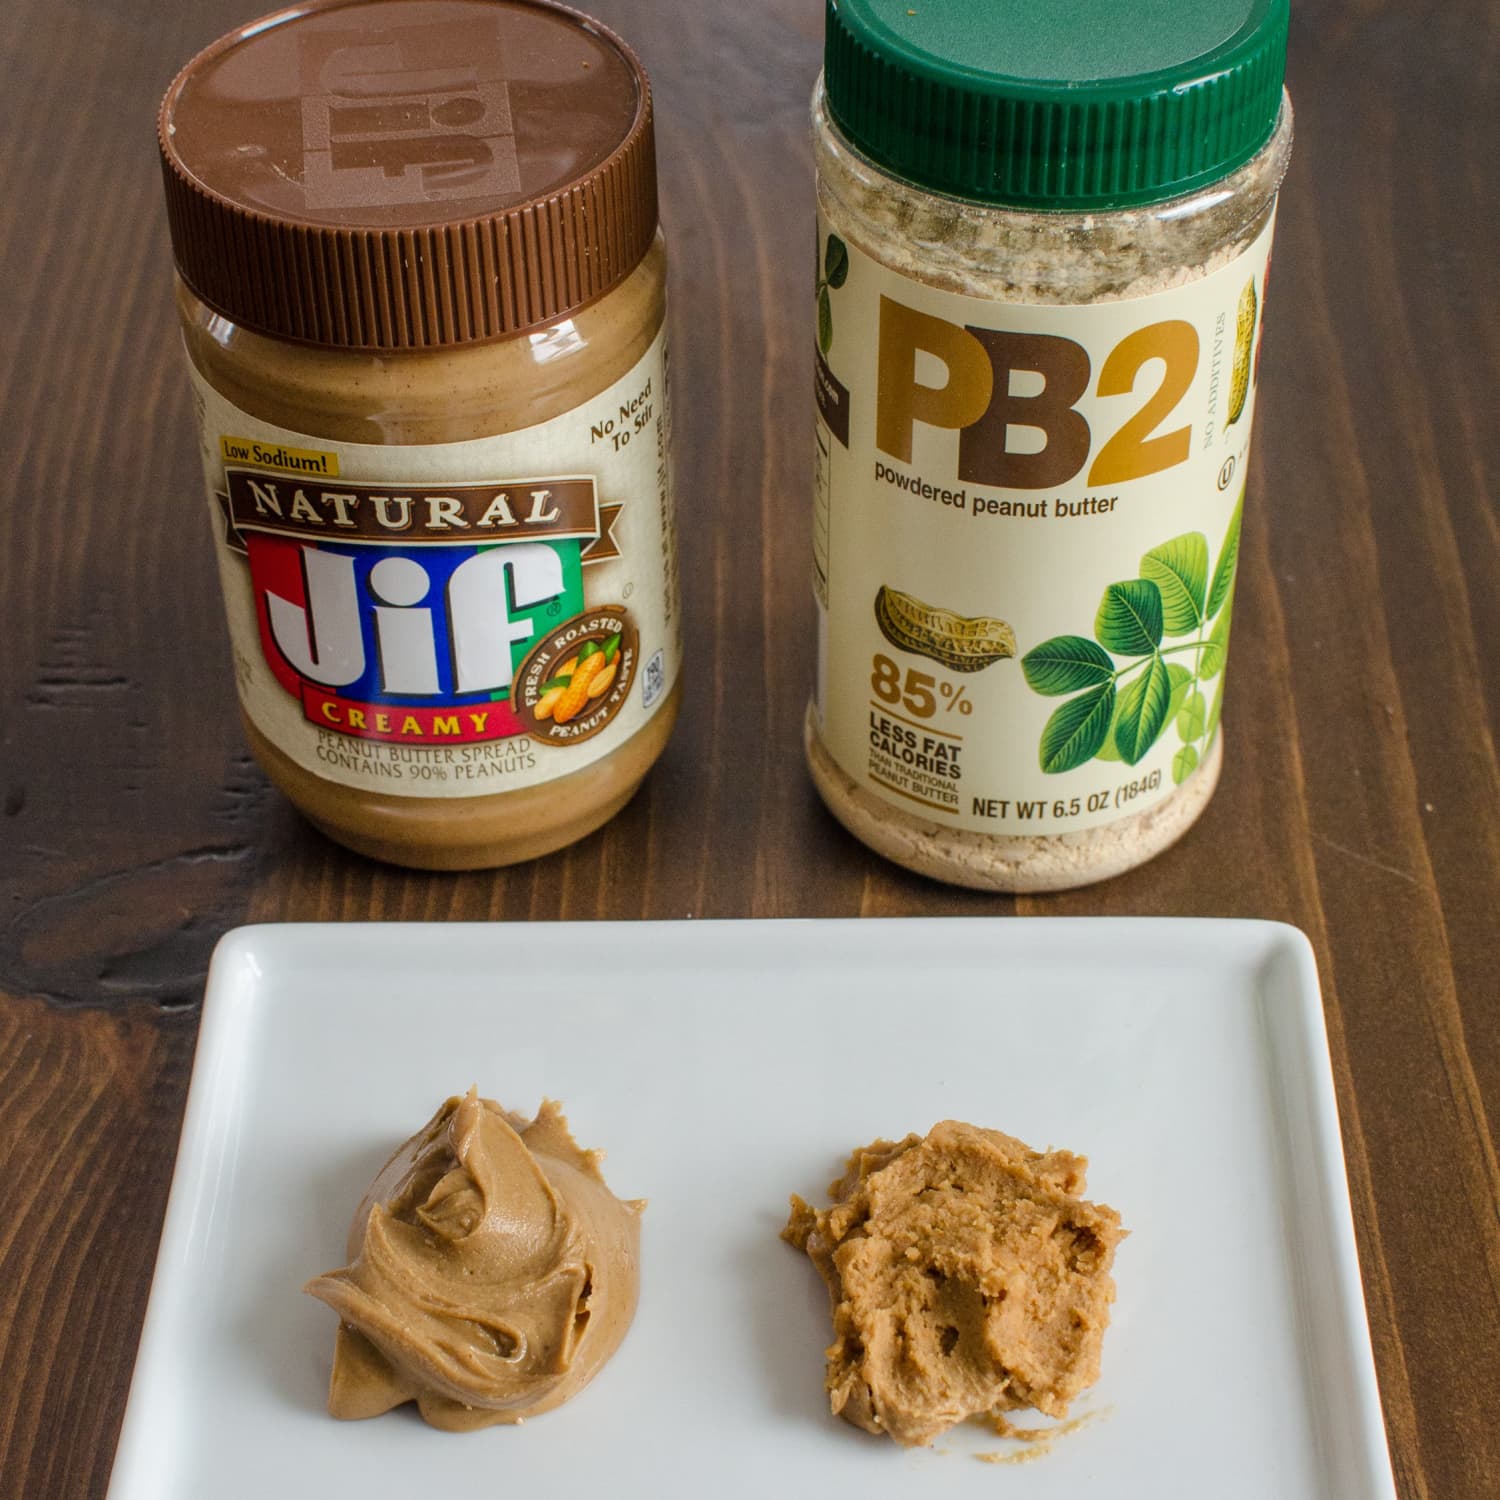 boom kondensator hylde What's the Deal with Powdered Peanut Butter? | The Kitchn